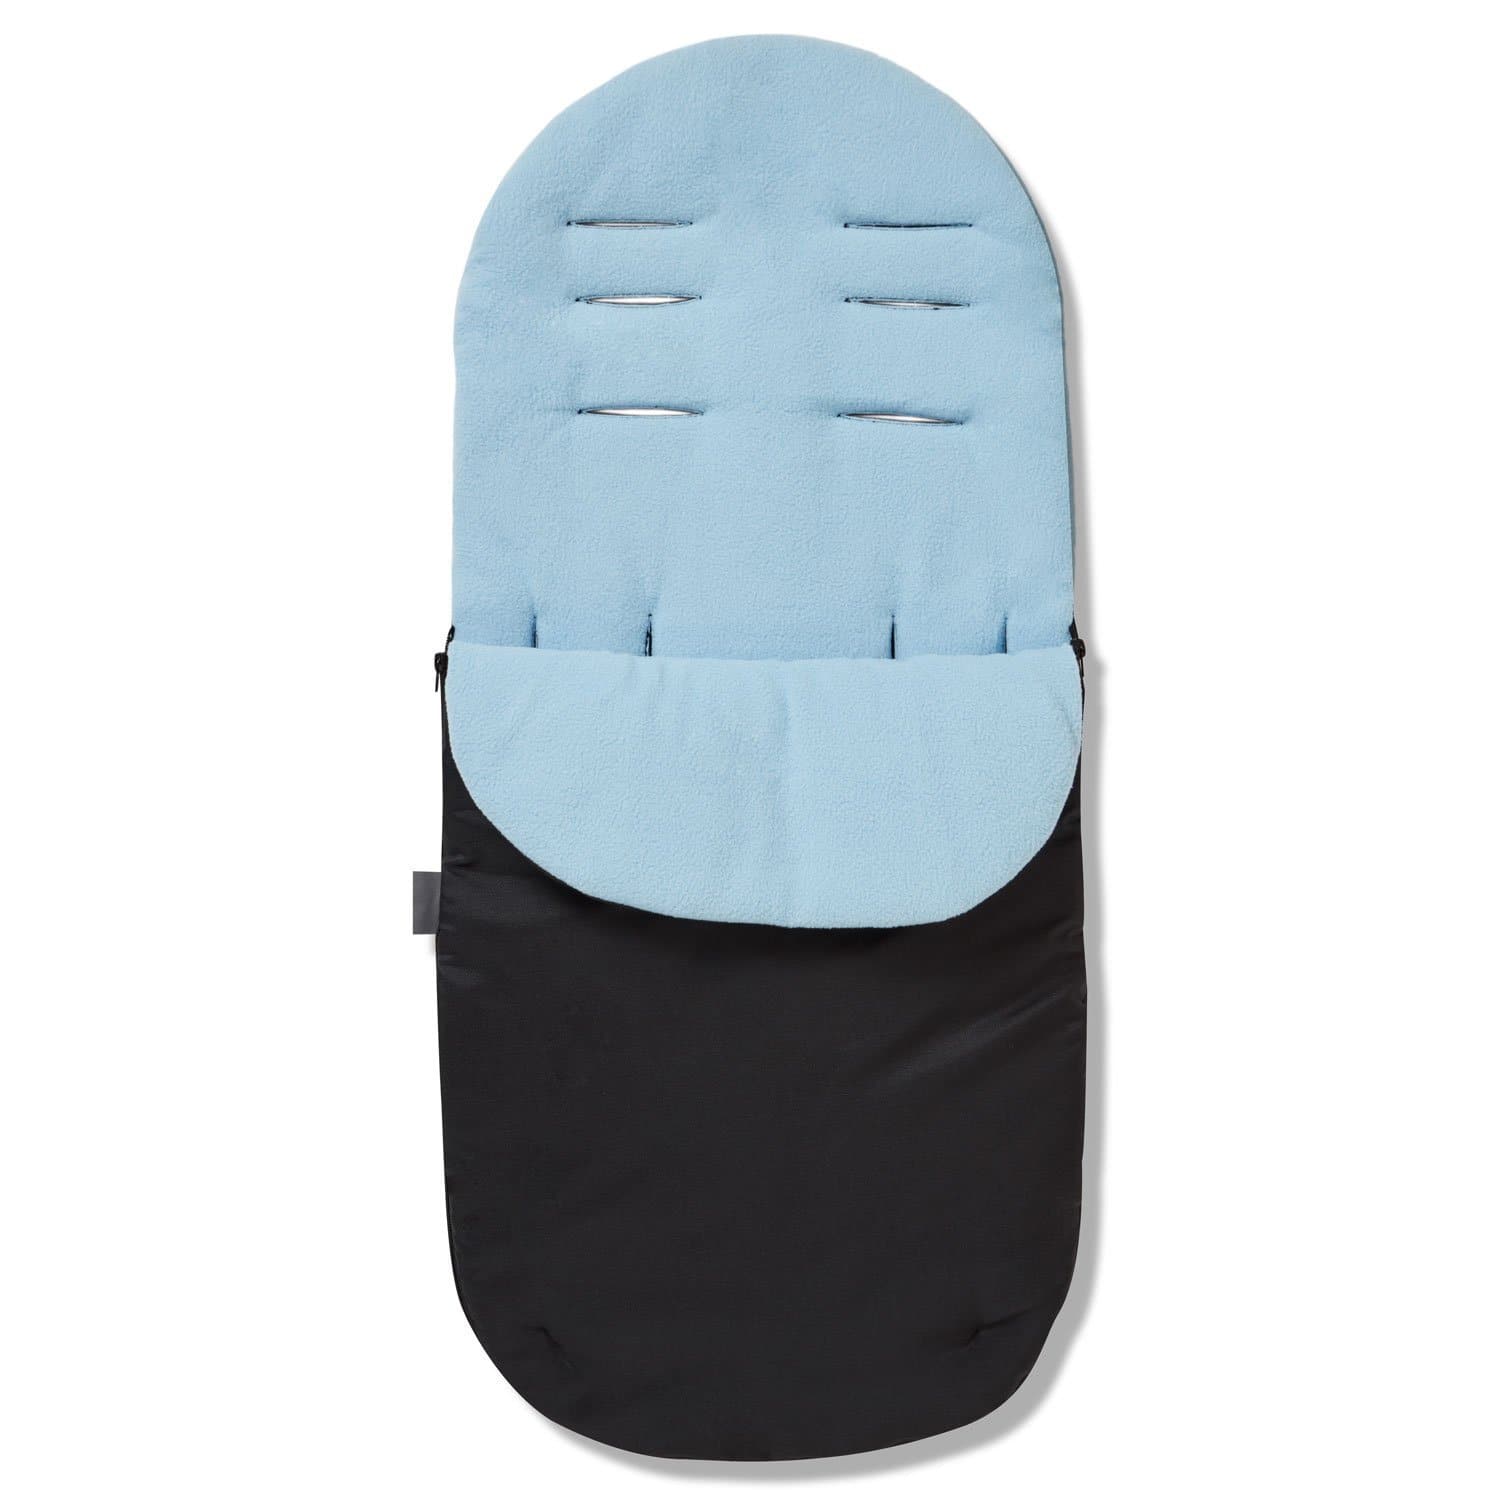 Footmuff / Cosy Toes Compatible with Gesslein - Light Blue / Fits All Models | For Your Little One